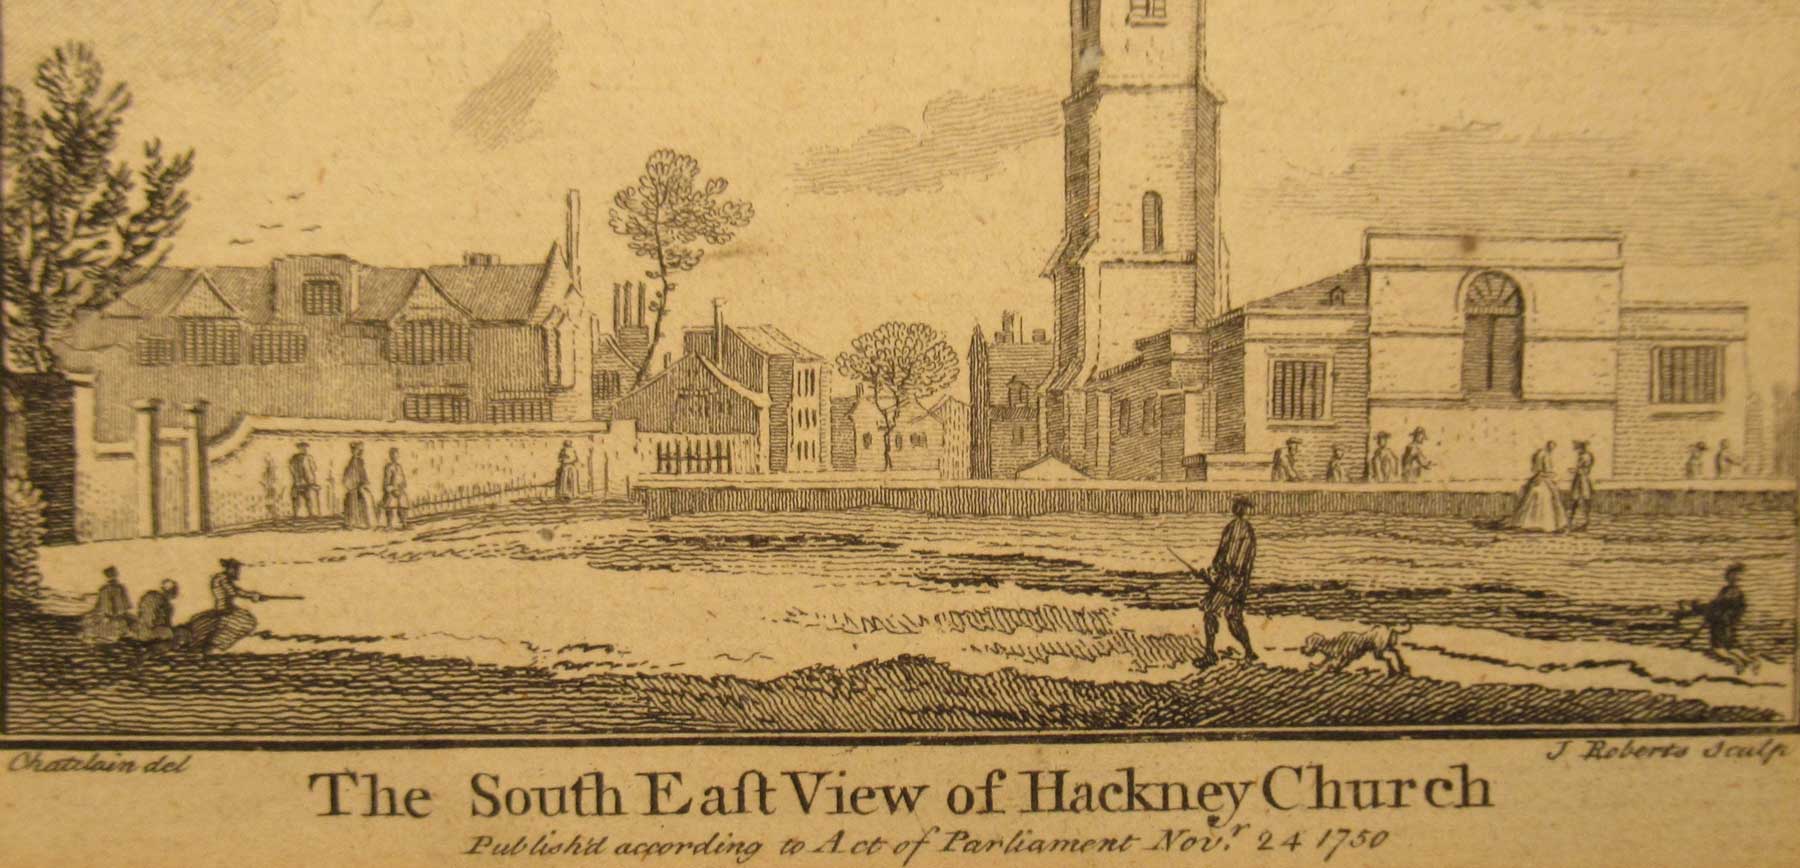 Hackney Church from the South East in the mid-18th Century